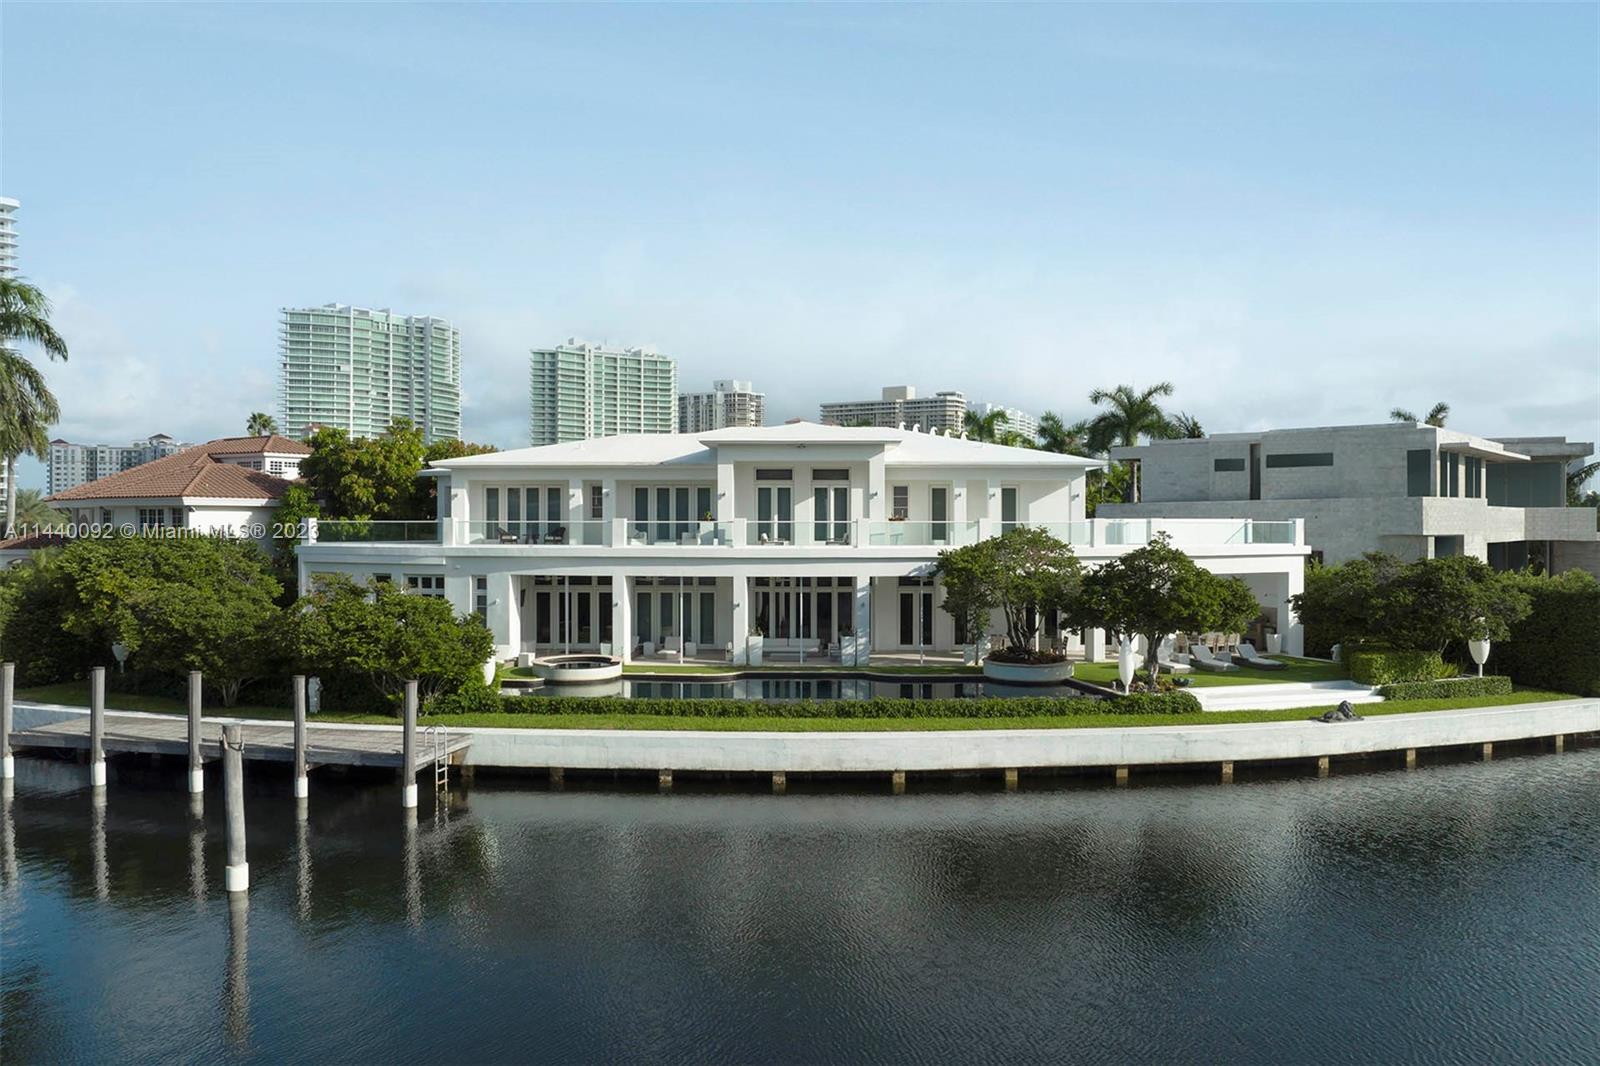 Nestled in the heart of the exclusive Golden Beach community, 142 S. Island Drive encompasses 0.41 acres+/- of waterfront land with manicured exteriors, a private dock, and an expansive modern home.
This residence boasts sweeping Intracoastal vistas and 11,337 SF+/- of living space with 6 bedrooms, 8 full and 1 half bathrooms, representing an incredible opportunity to take in the exquisite atmosphere of Golden Beach or set off via boat to visit the community’s private shore and nearby cultural centers.